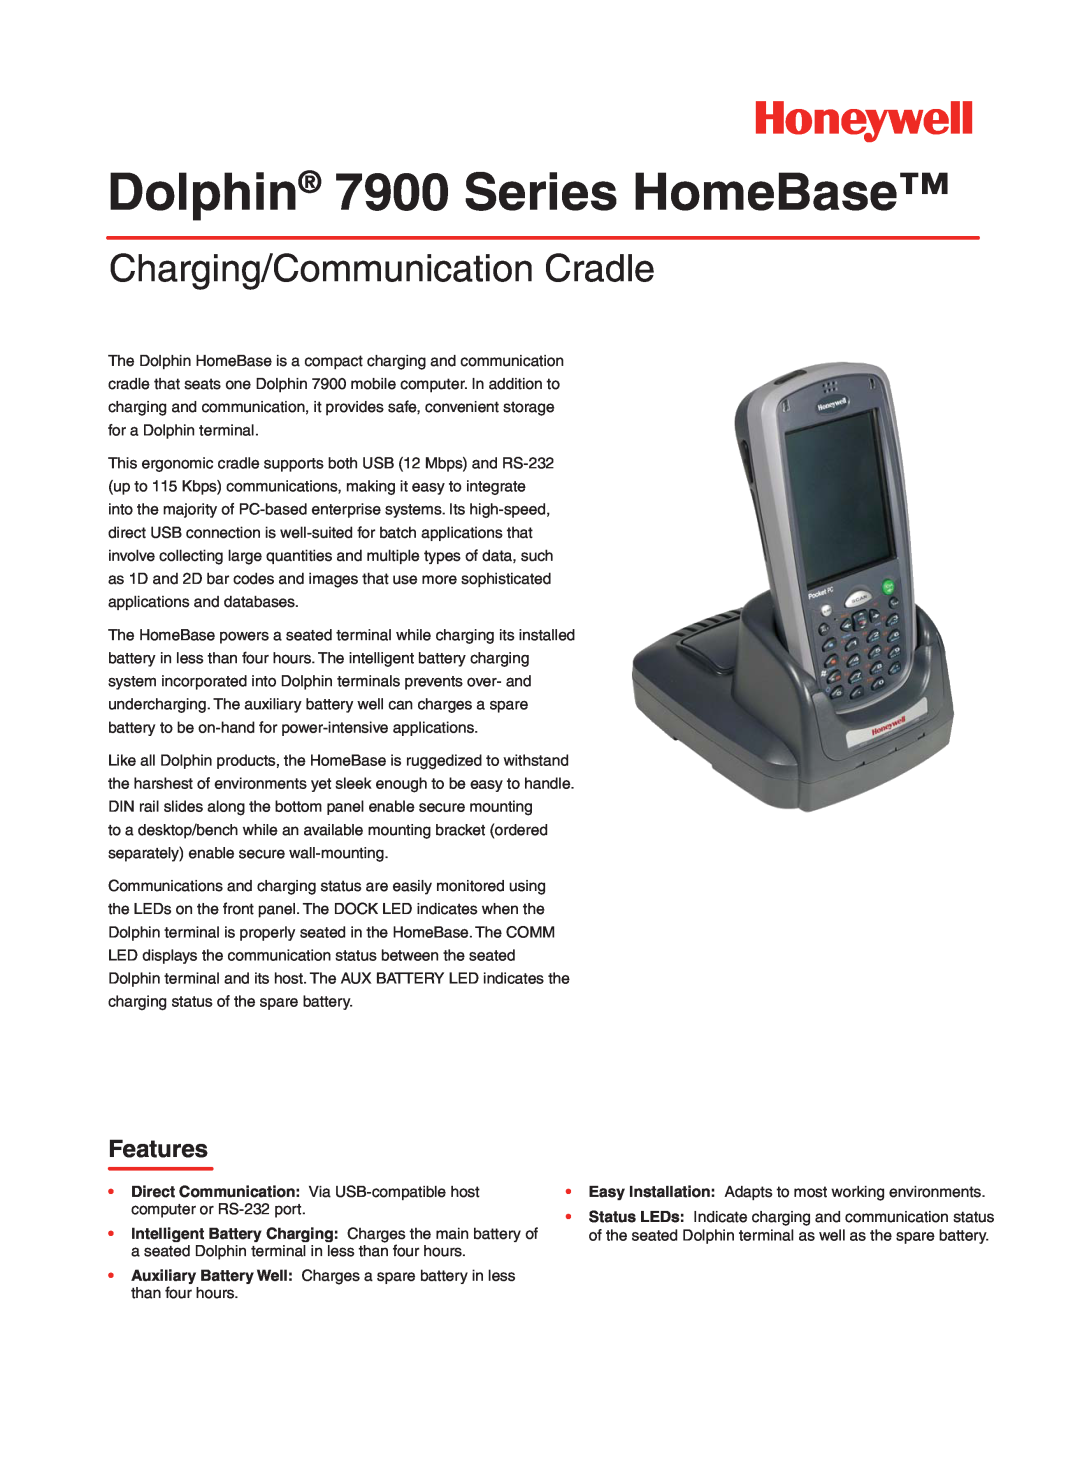 Honeywell D7900 manual Dolphin 7900 Series HomeBase, Charging/Communication Cradle, Features 